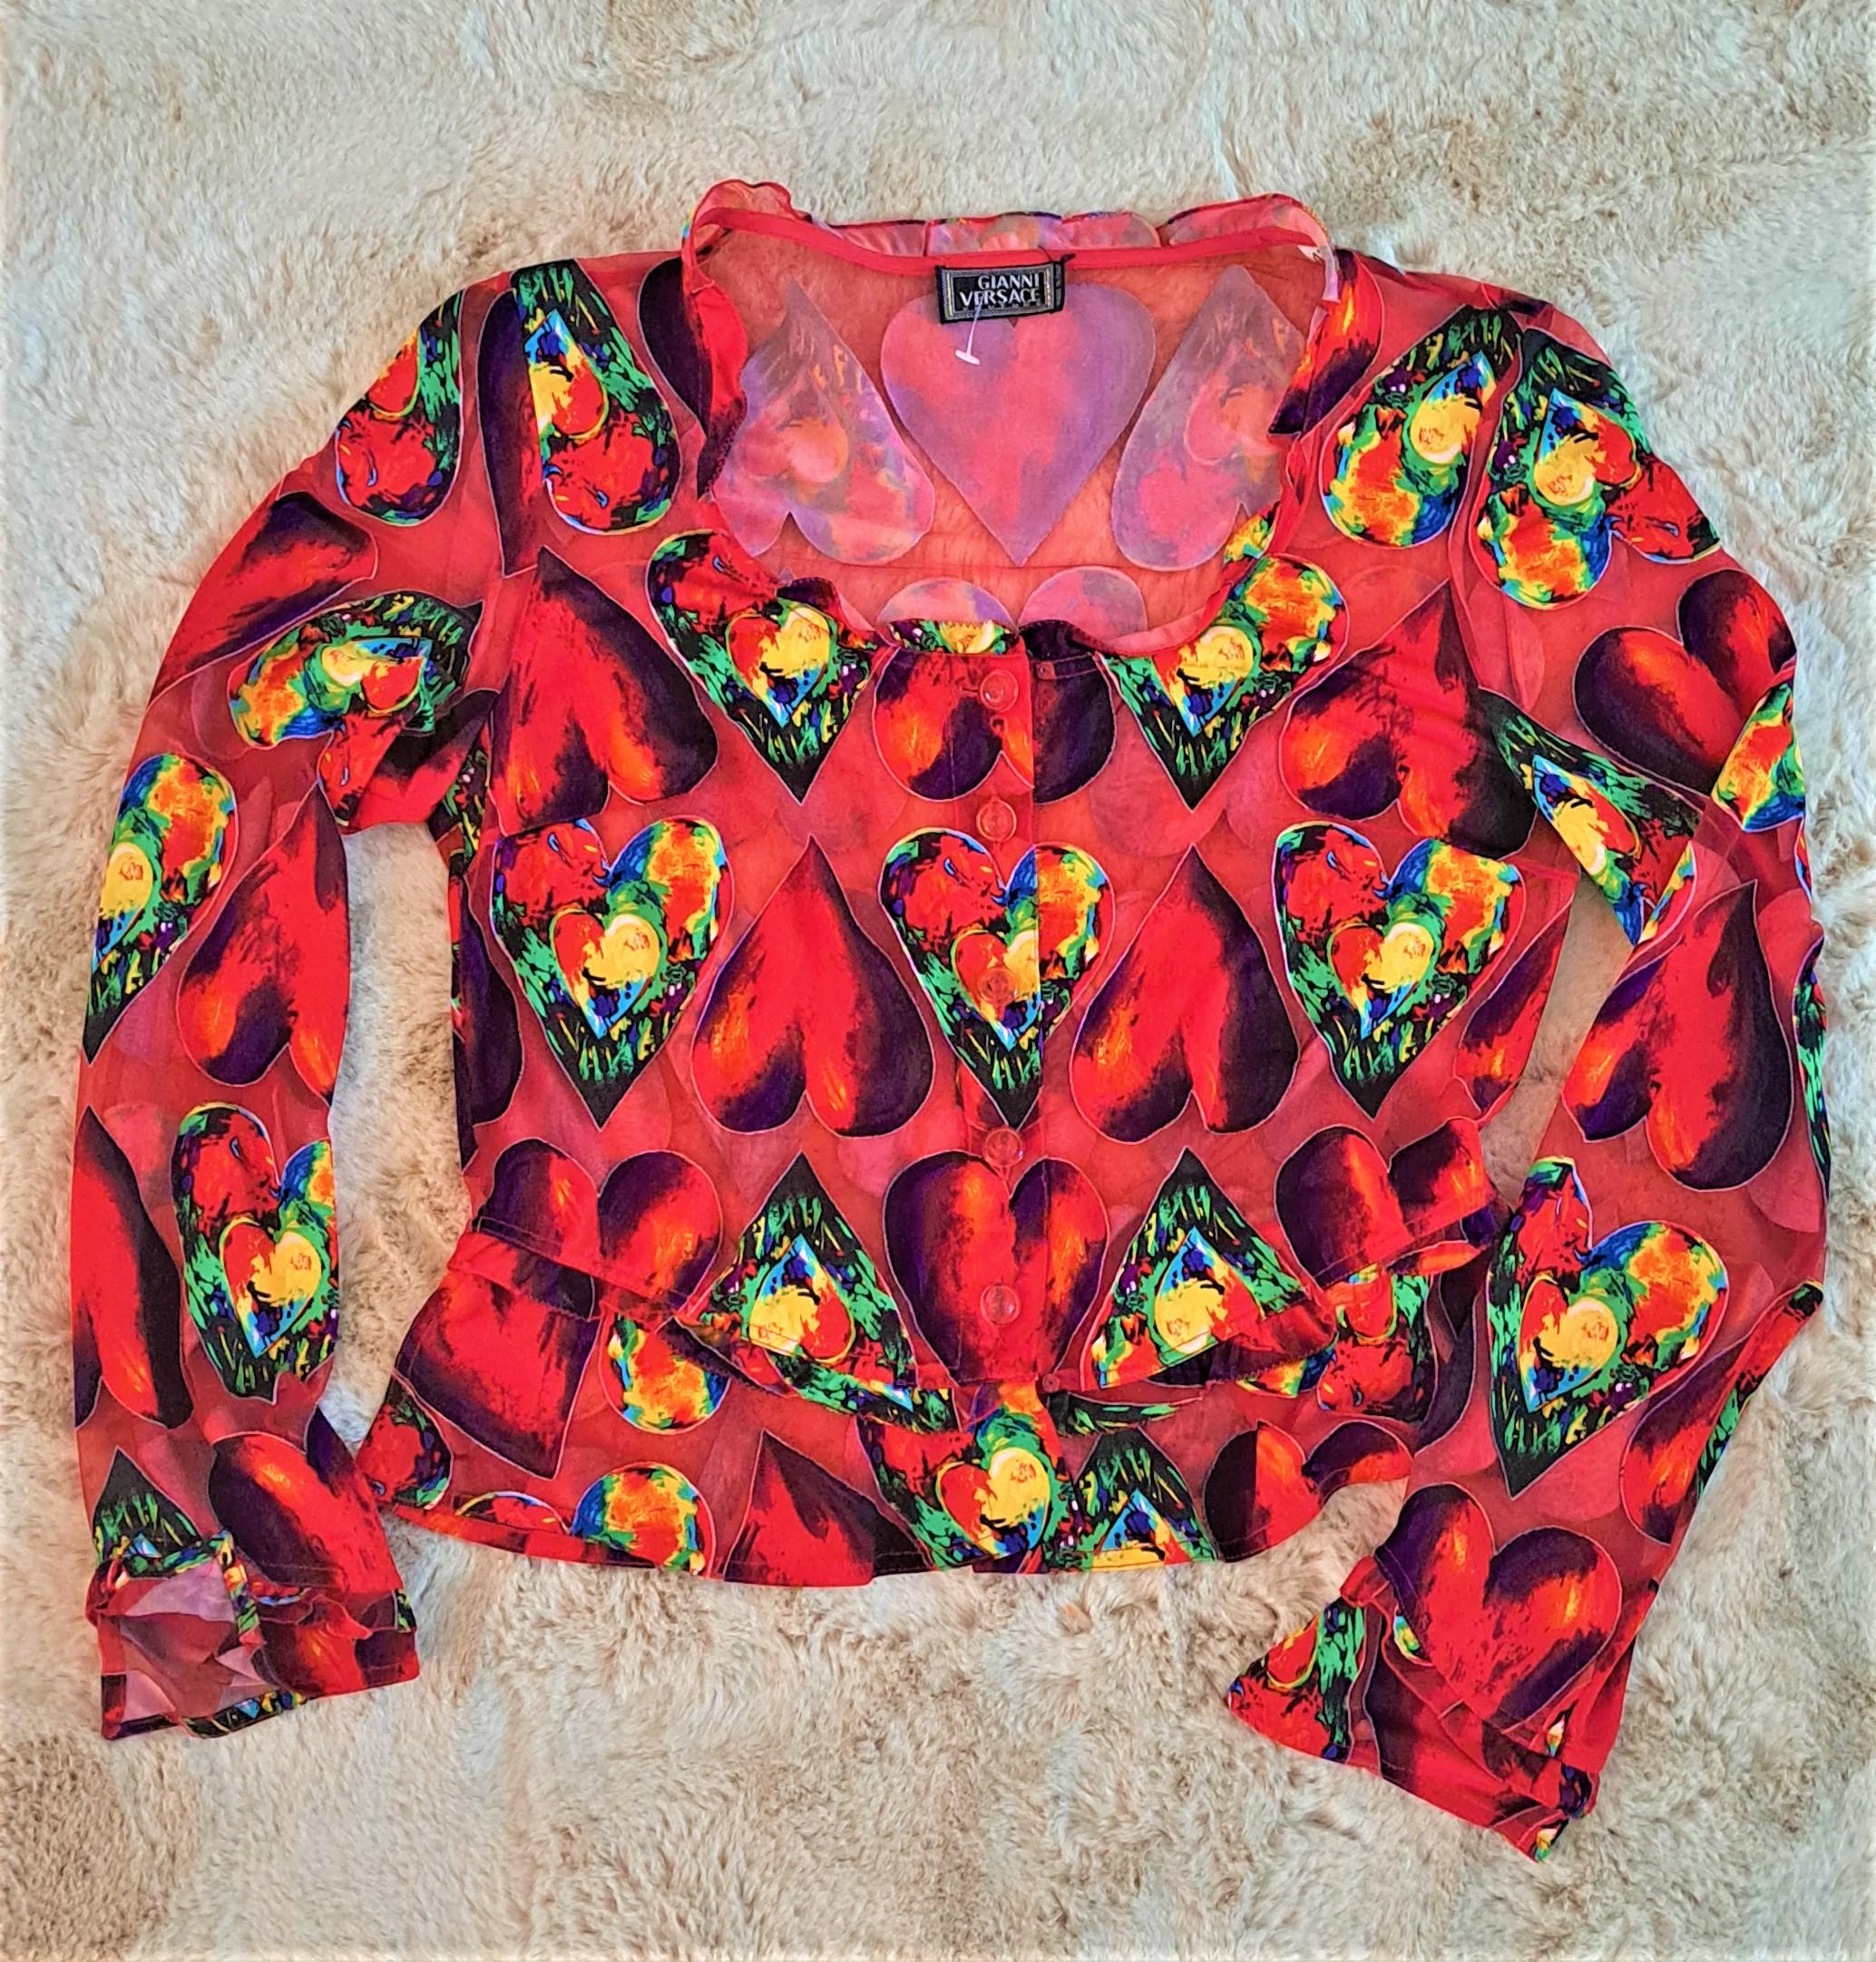 Gianni Versace Spring 1990s Pink Heart Blouse Inspired by Jim Dine In Excellent Condition For Sale In 'S-HERTOGENBOSCH, NL